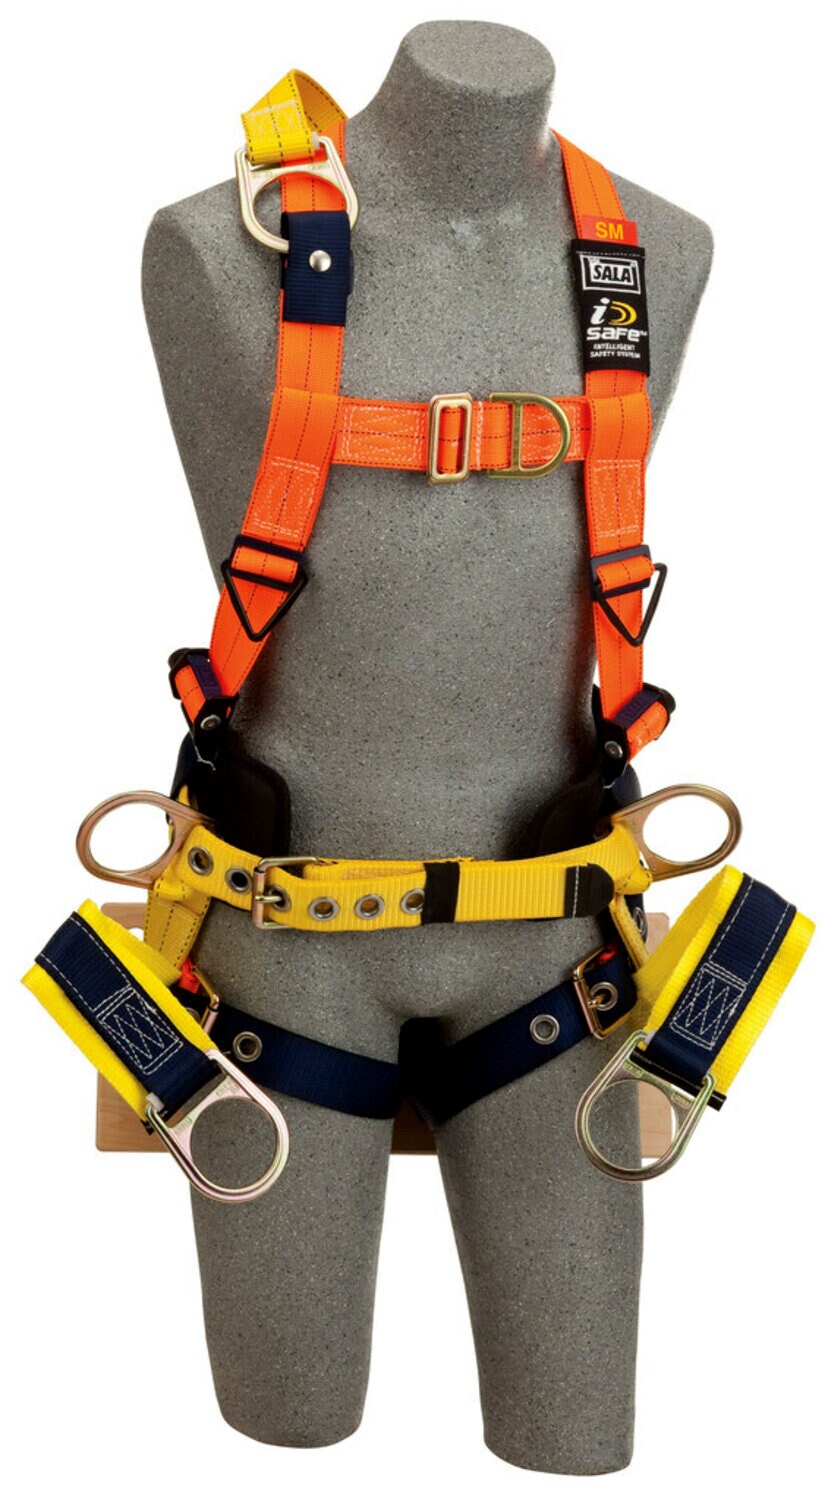 7012815651 - 3M DBI-SALA Delta Oil and Gas Climbing/Positioning/Suspension Safety Harness with Board Seat 1108129, Hi-Vis Orange, 2X